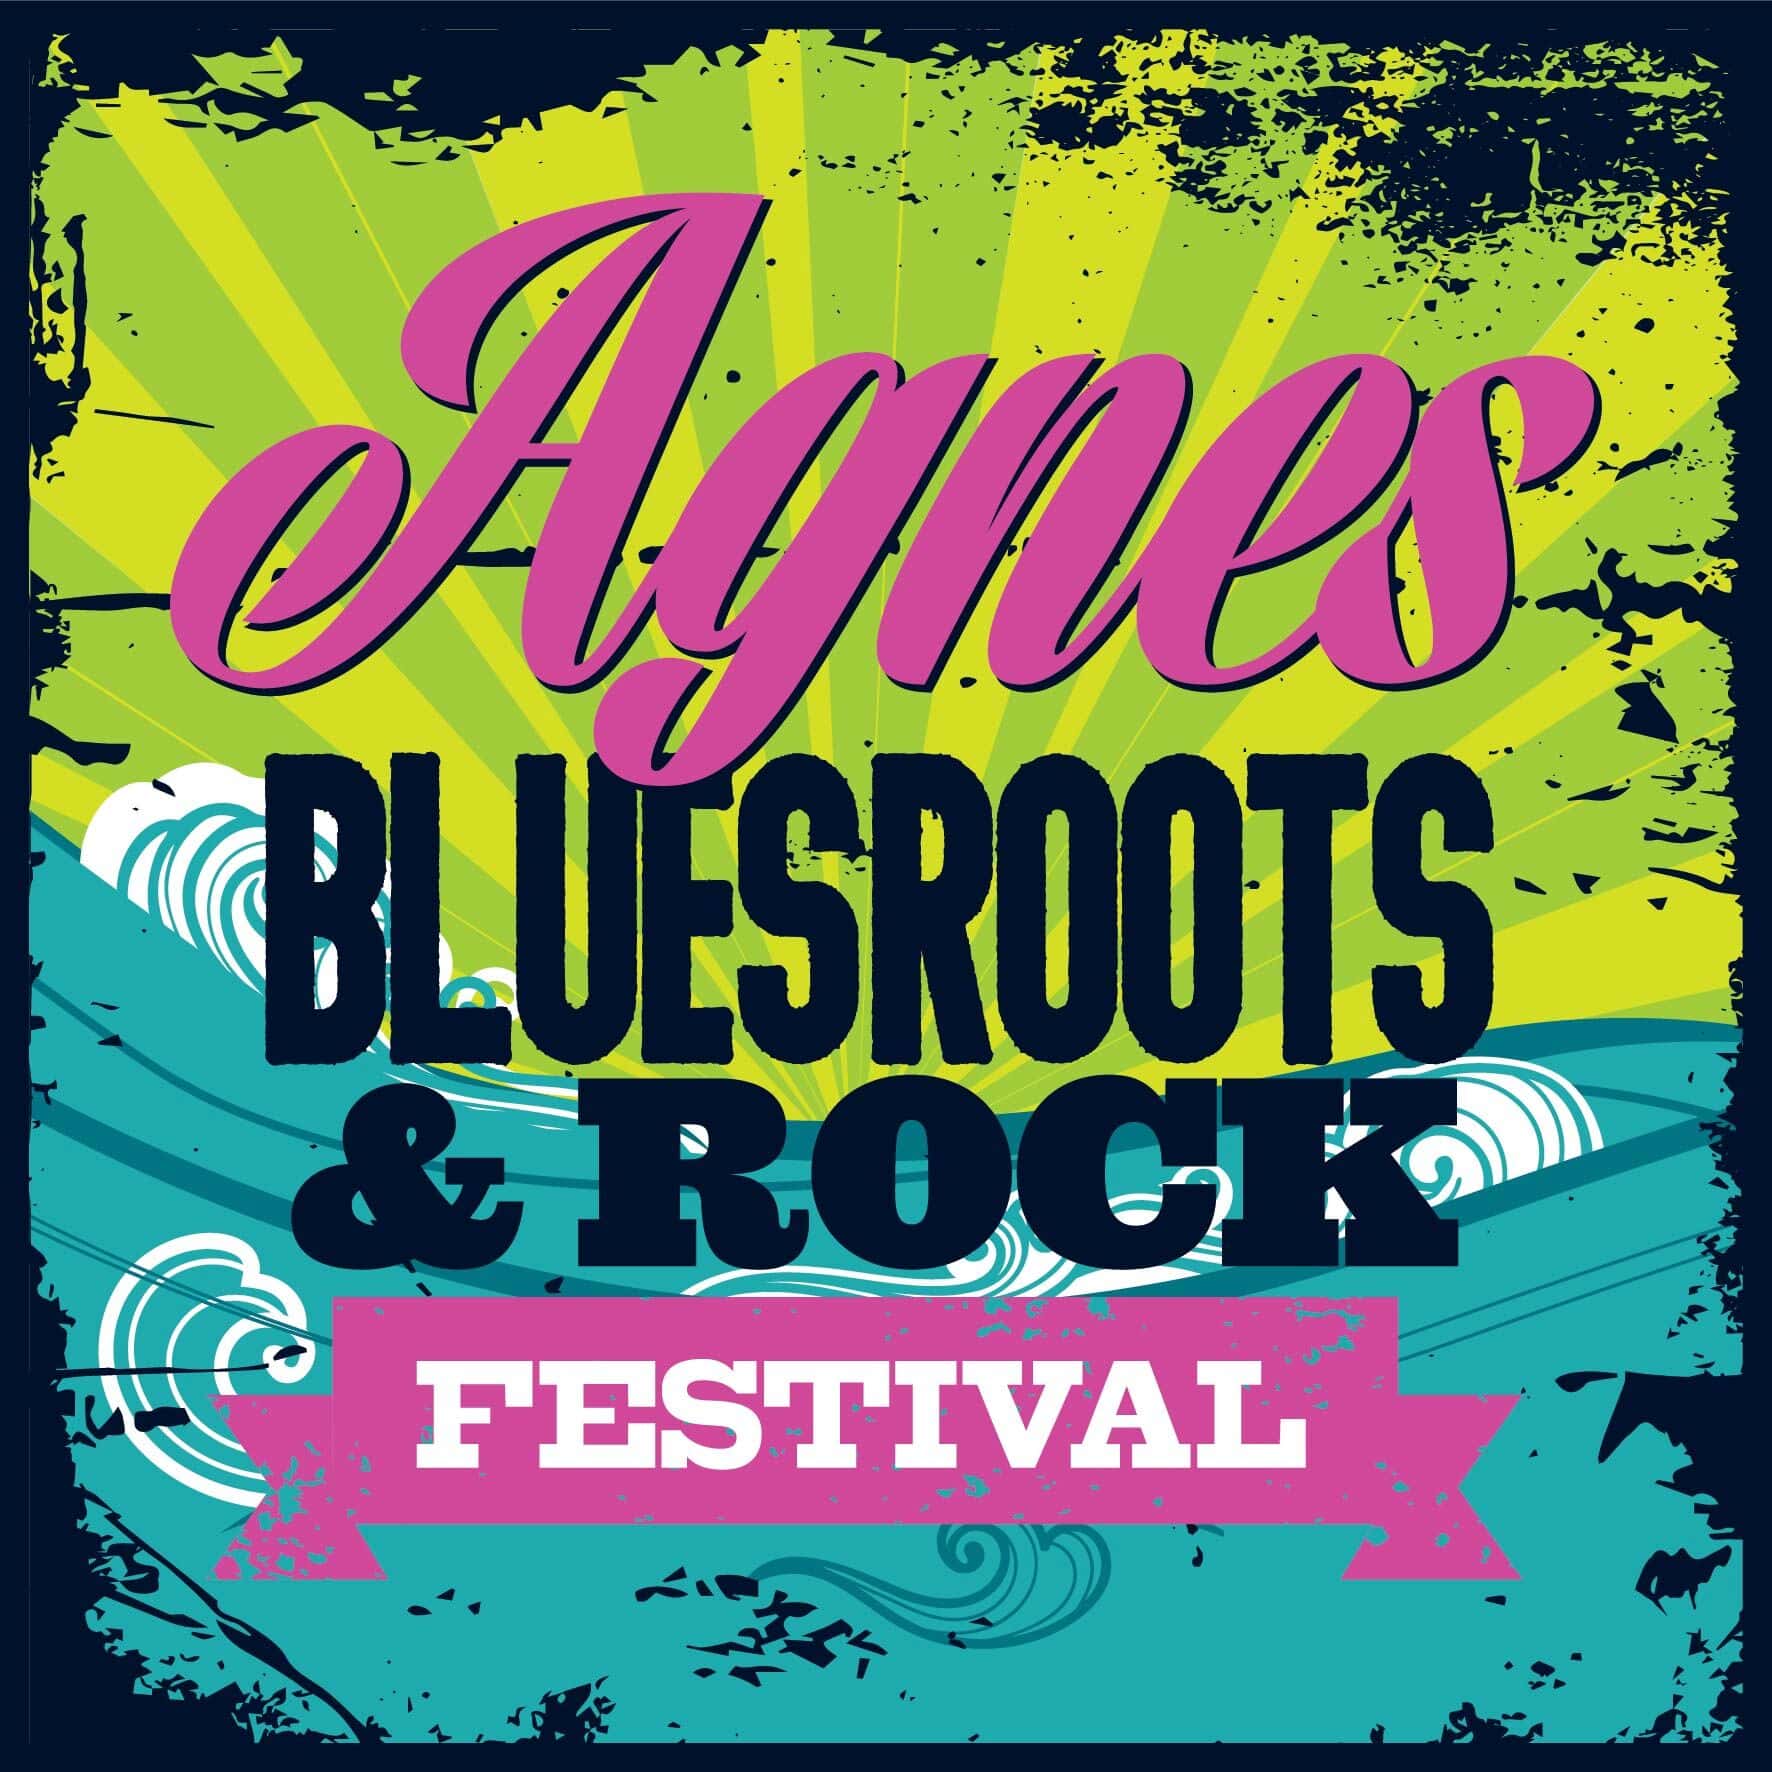 Agnes Blues, Roots & Rock Festival - Festival Lineup, Dates and Location